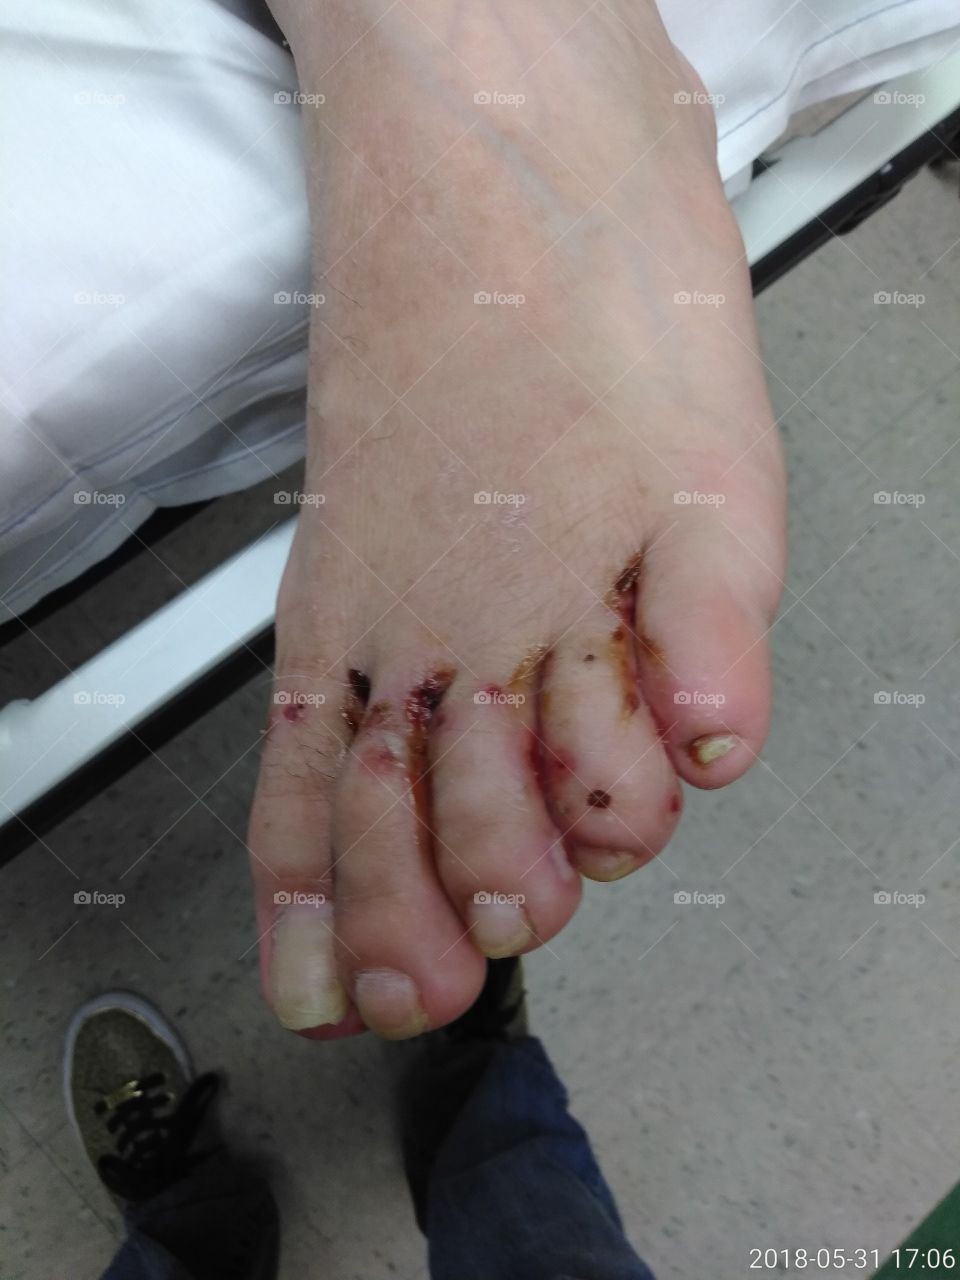 severe infection in toes